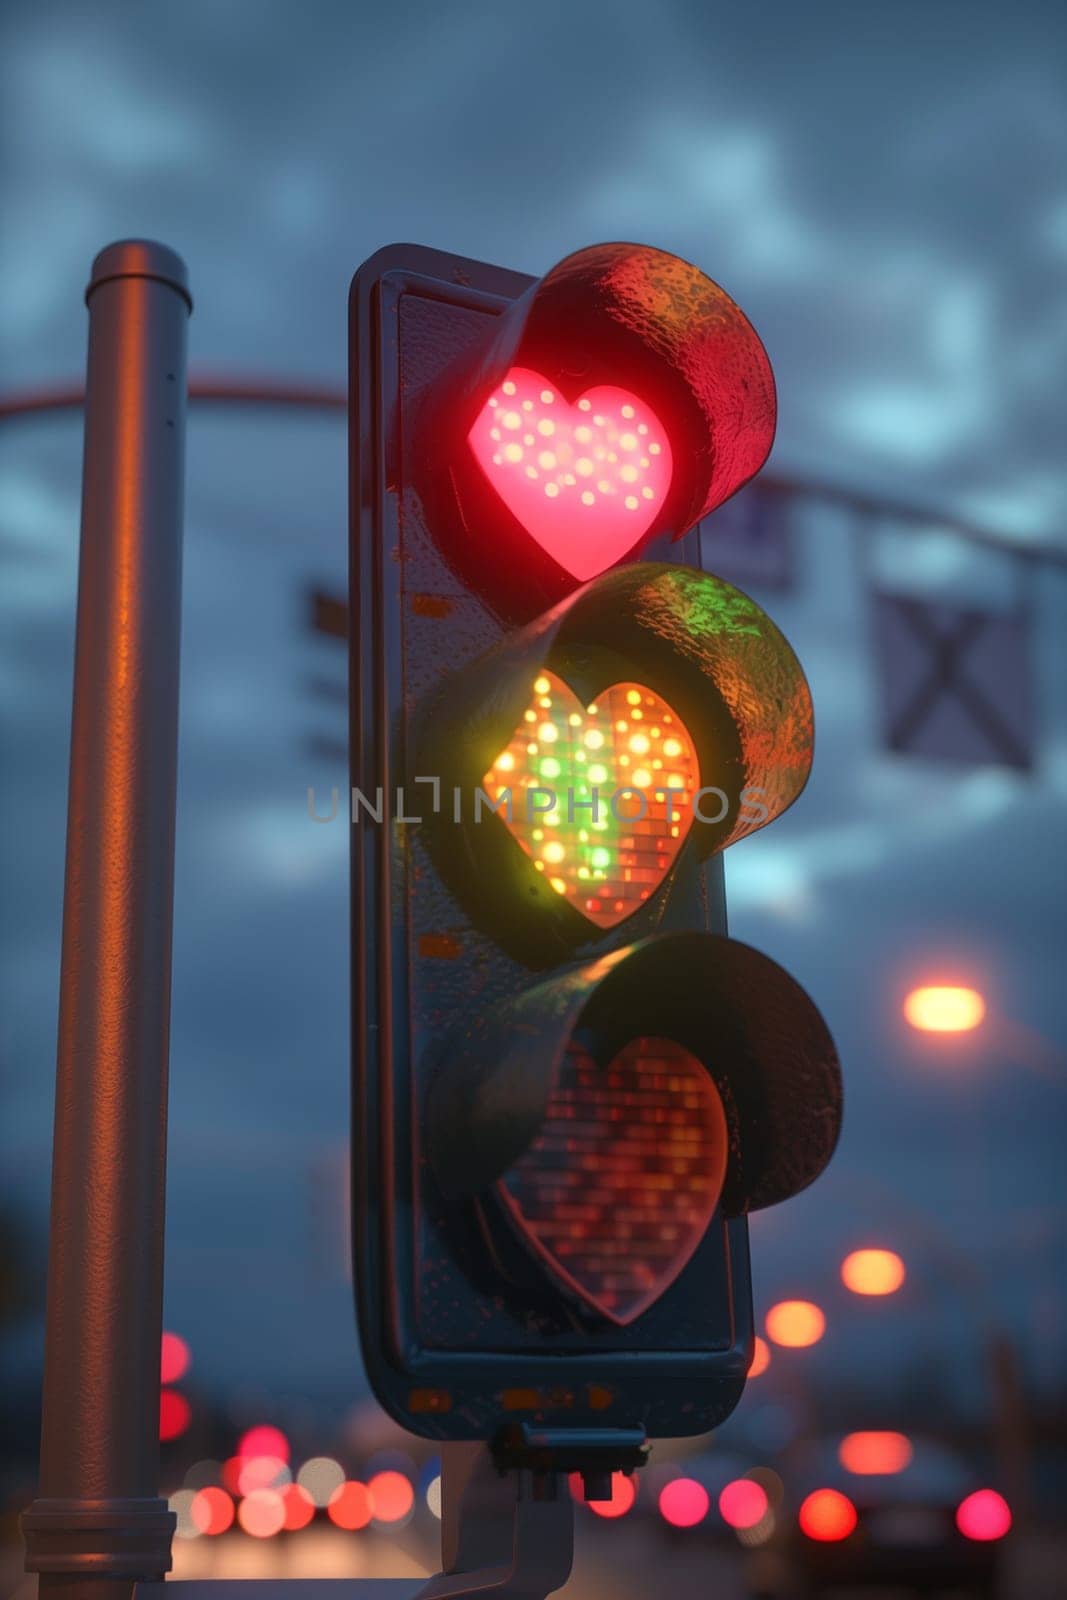 Traffic Light With Heart Symbol by Sd28DimoN_1976